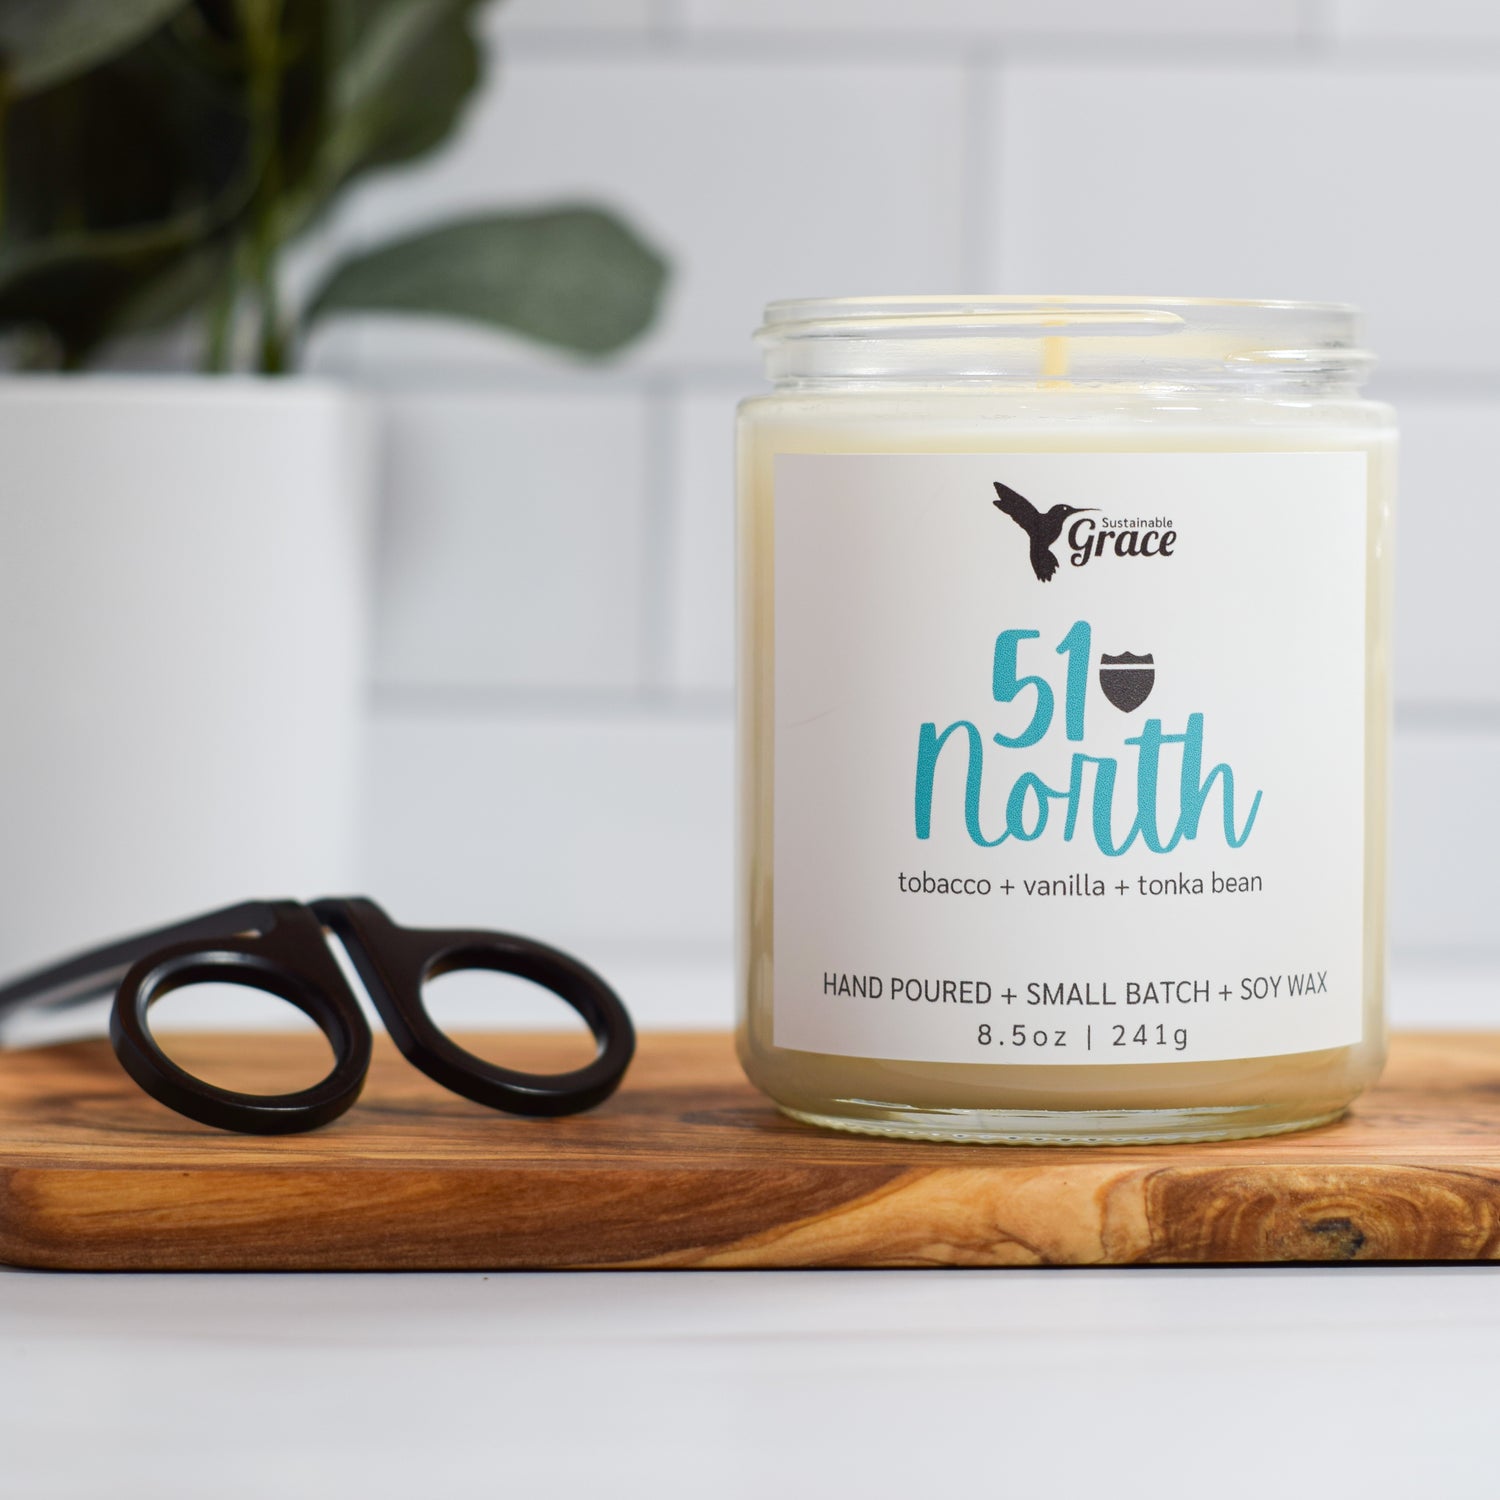 51 north tobacco and vanilla scented candle